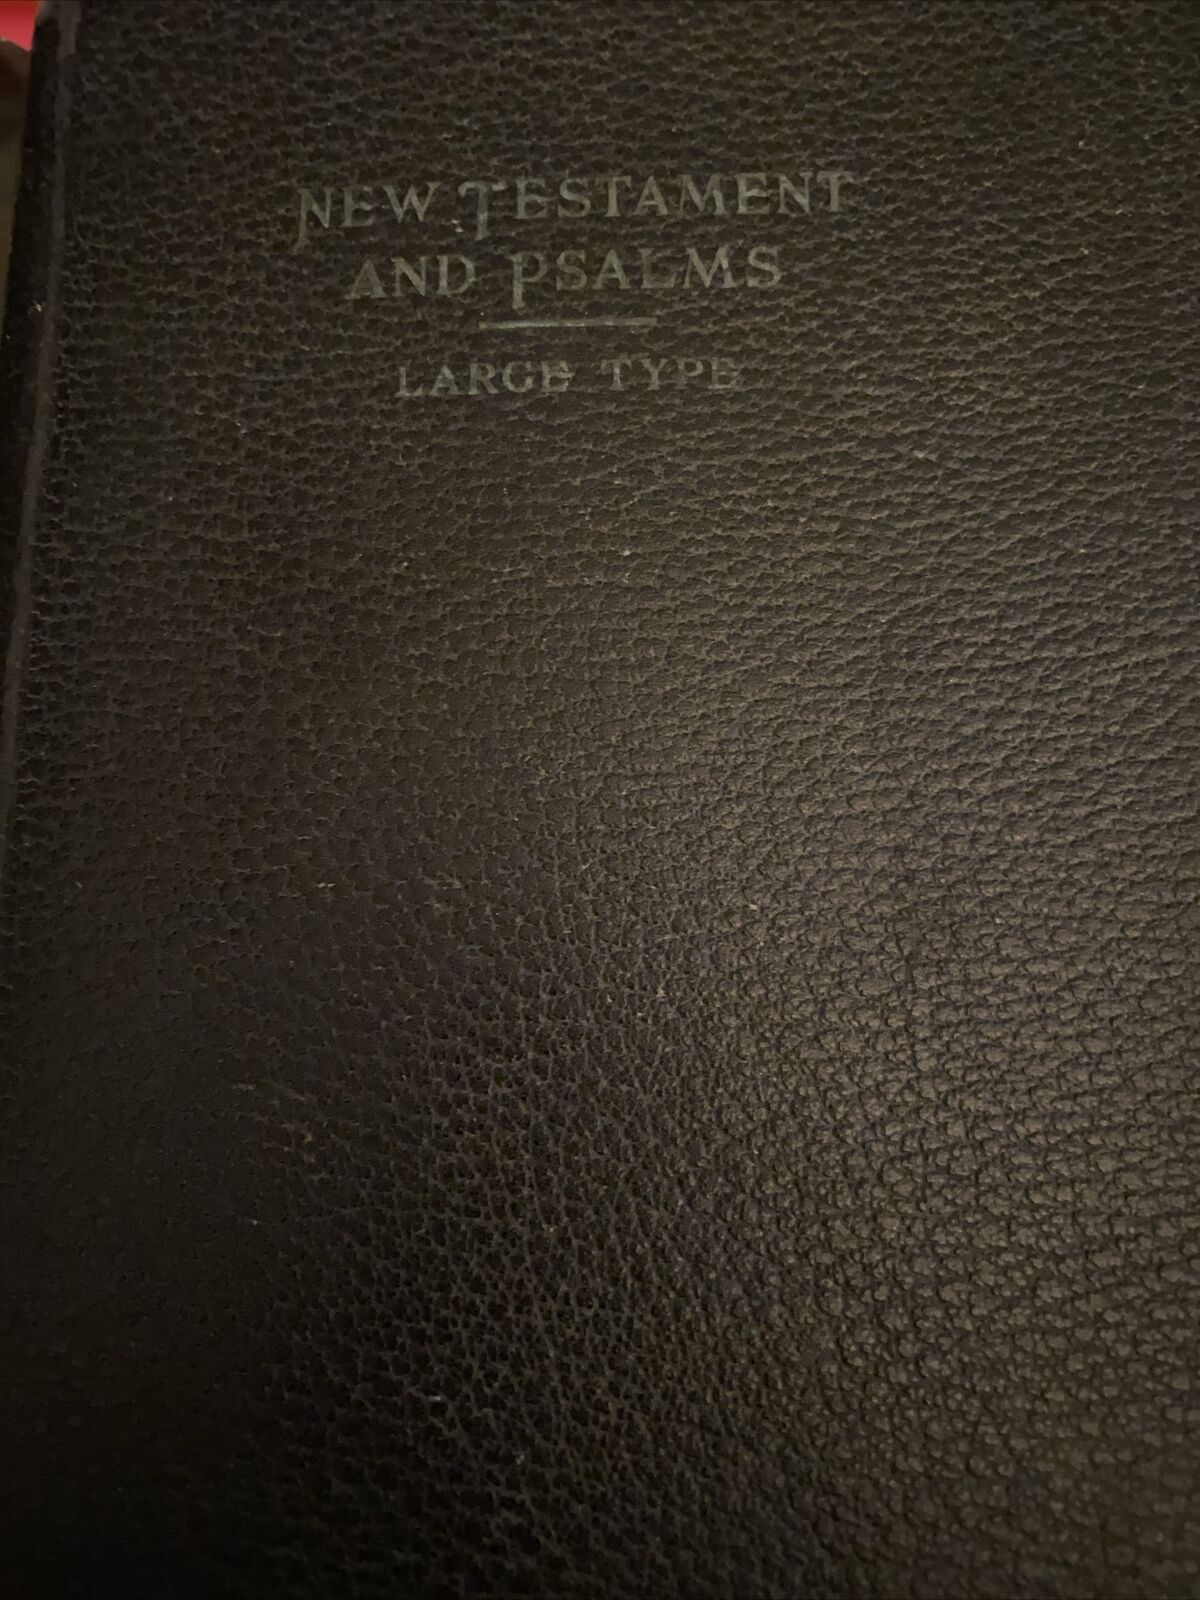 New Testament and Book of Psalms World Publishing - Inscription 1946